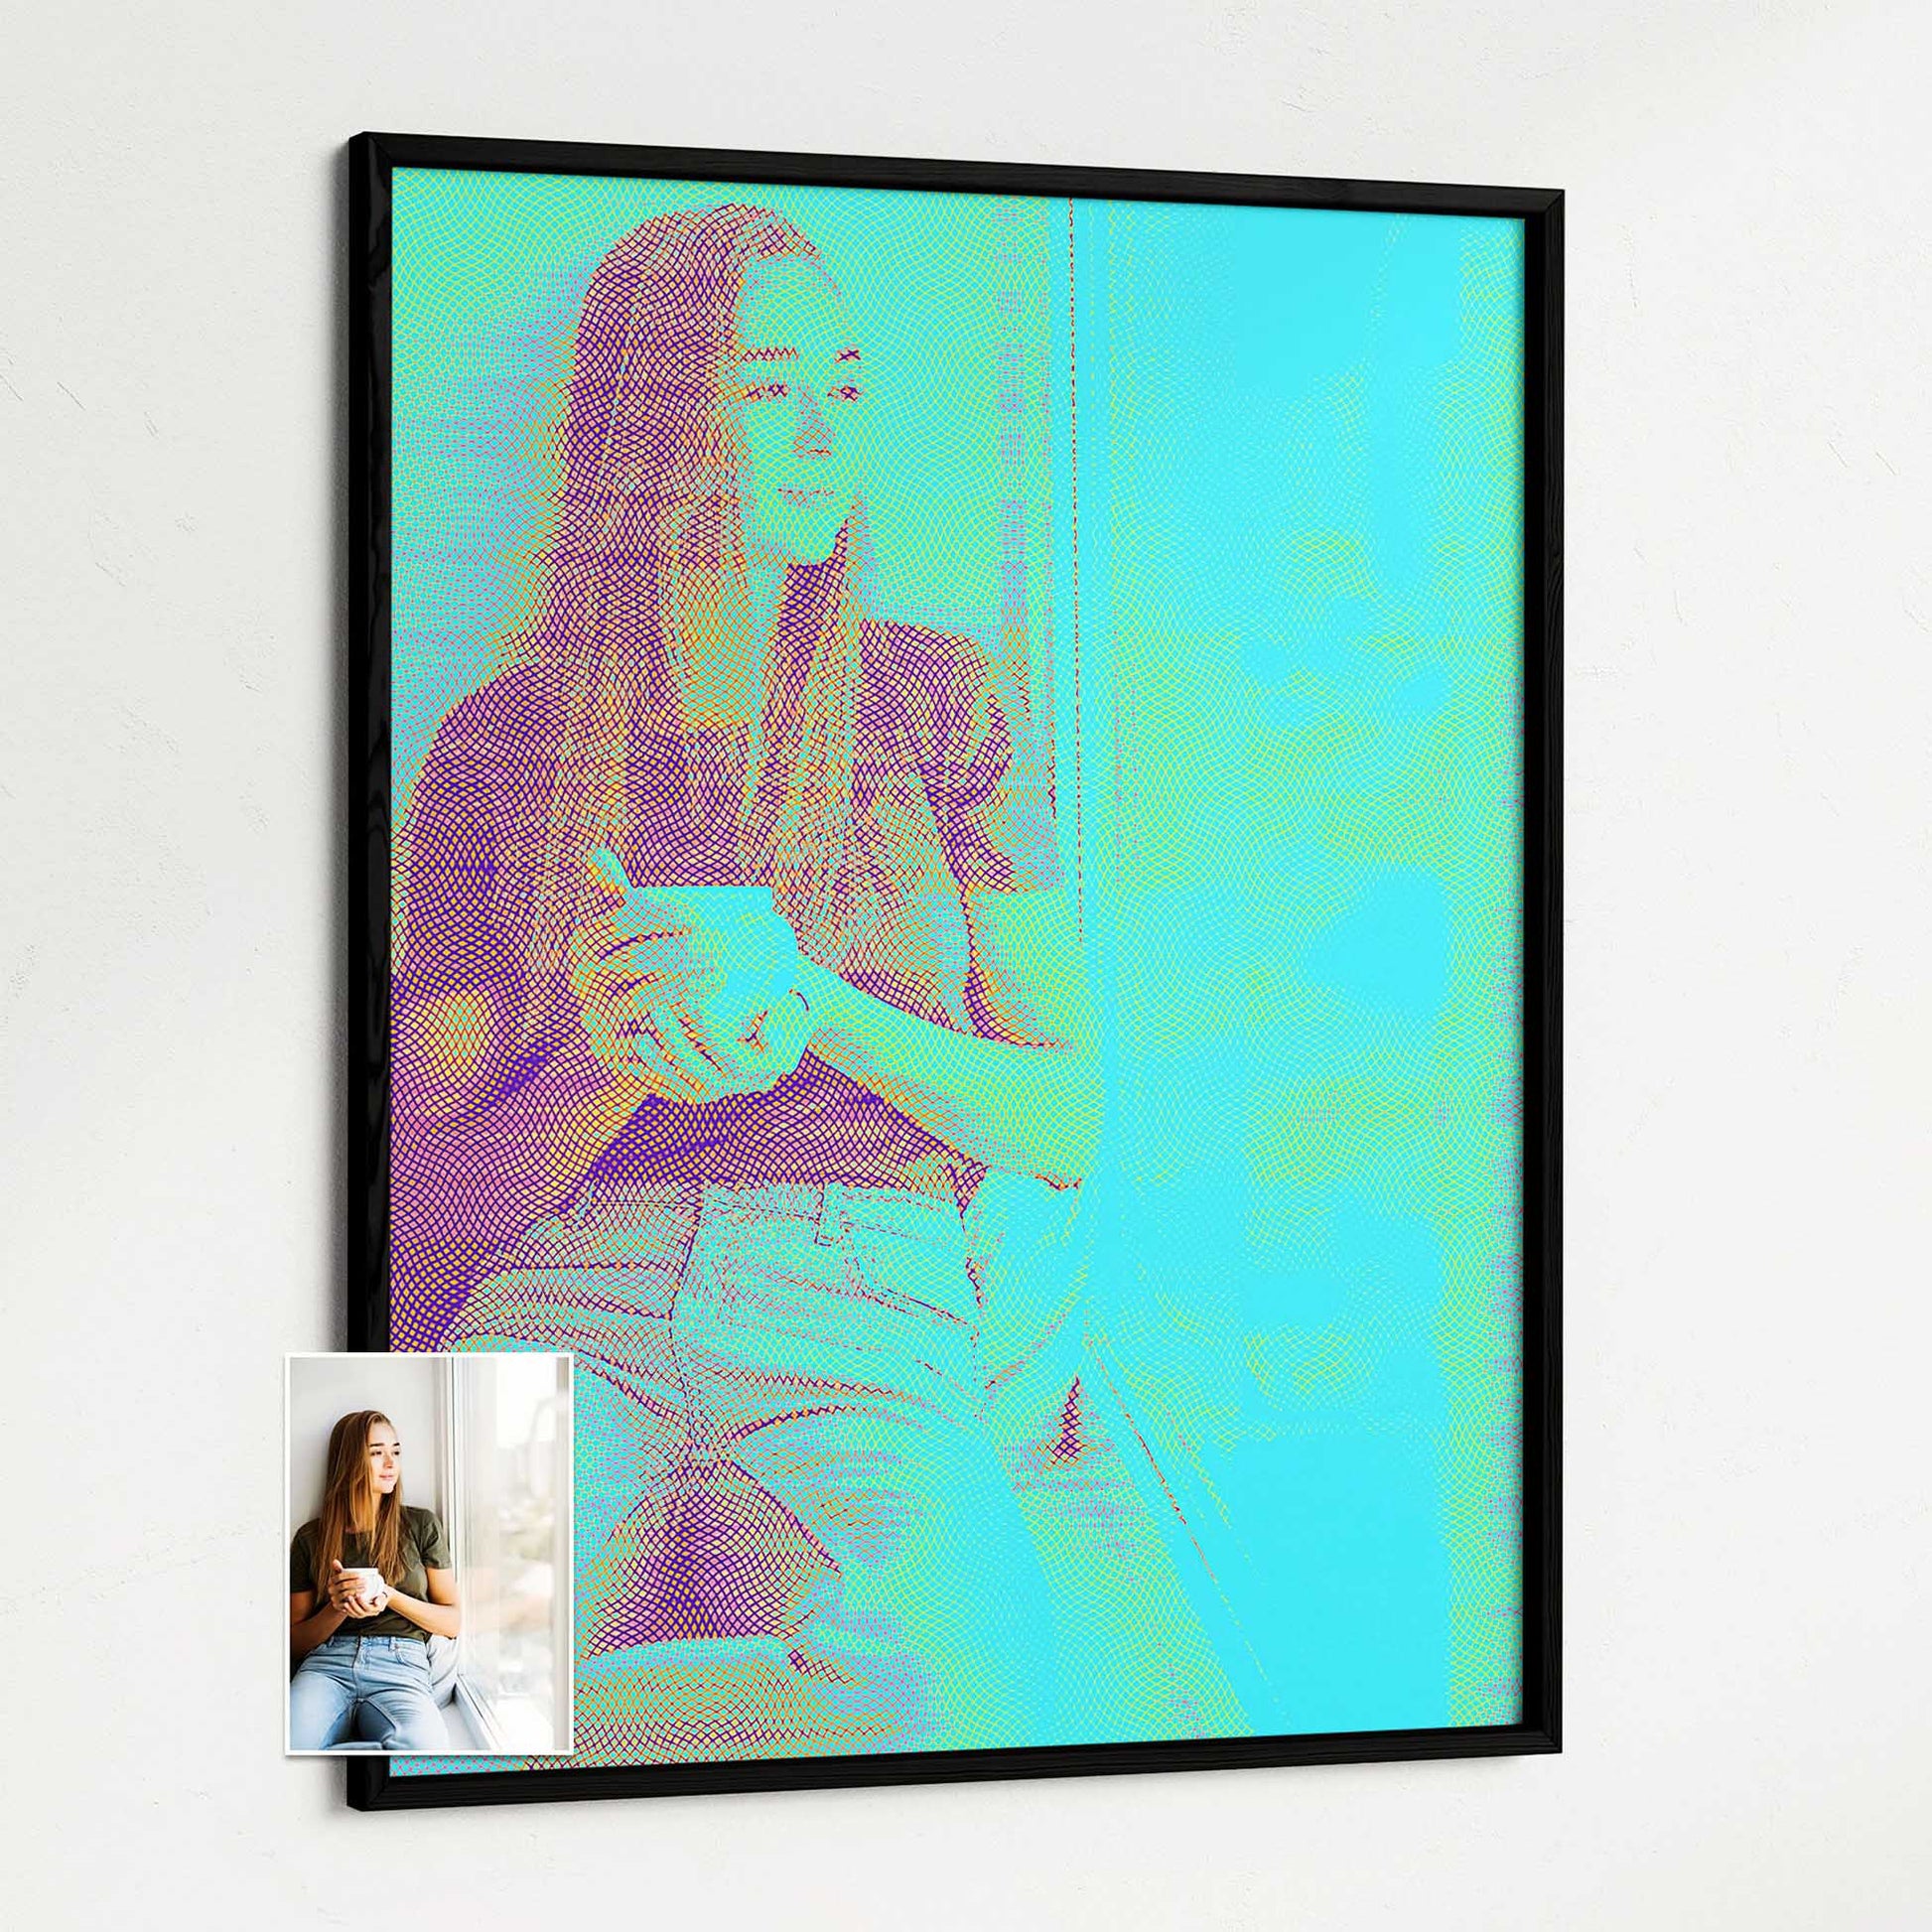 Bring a breath of fresh air to your walls with our Personalised Blue Engraved Framed Print. The cool and tranquil hues of this artwork evoke the serenity of a sea breeze, creating a relaxing atmosphere. Printed from your photo